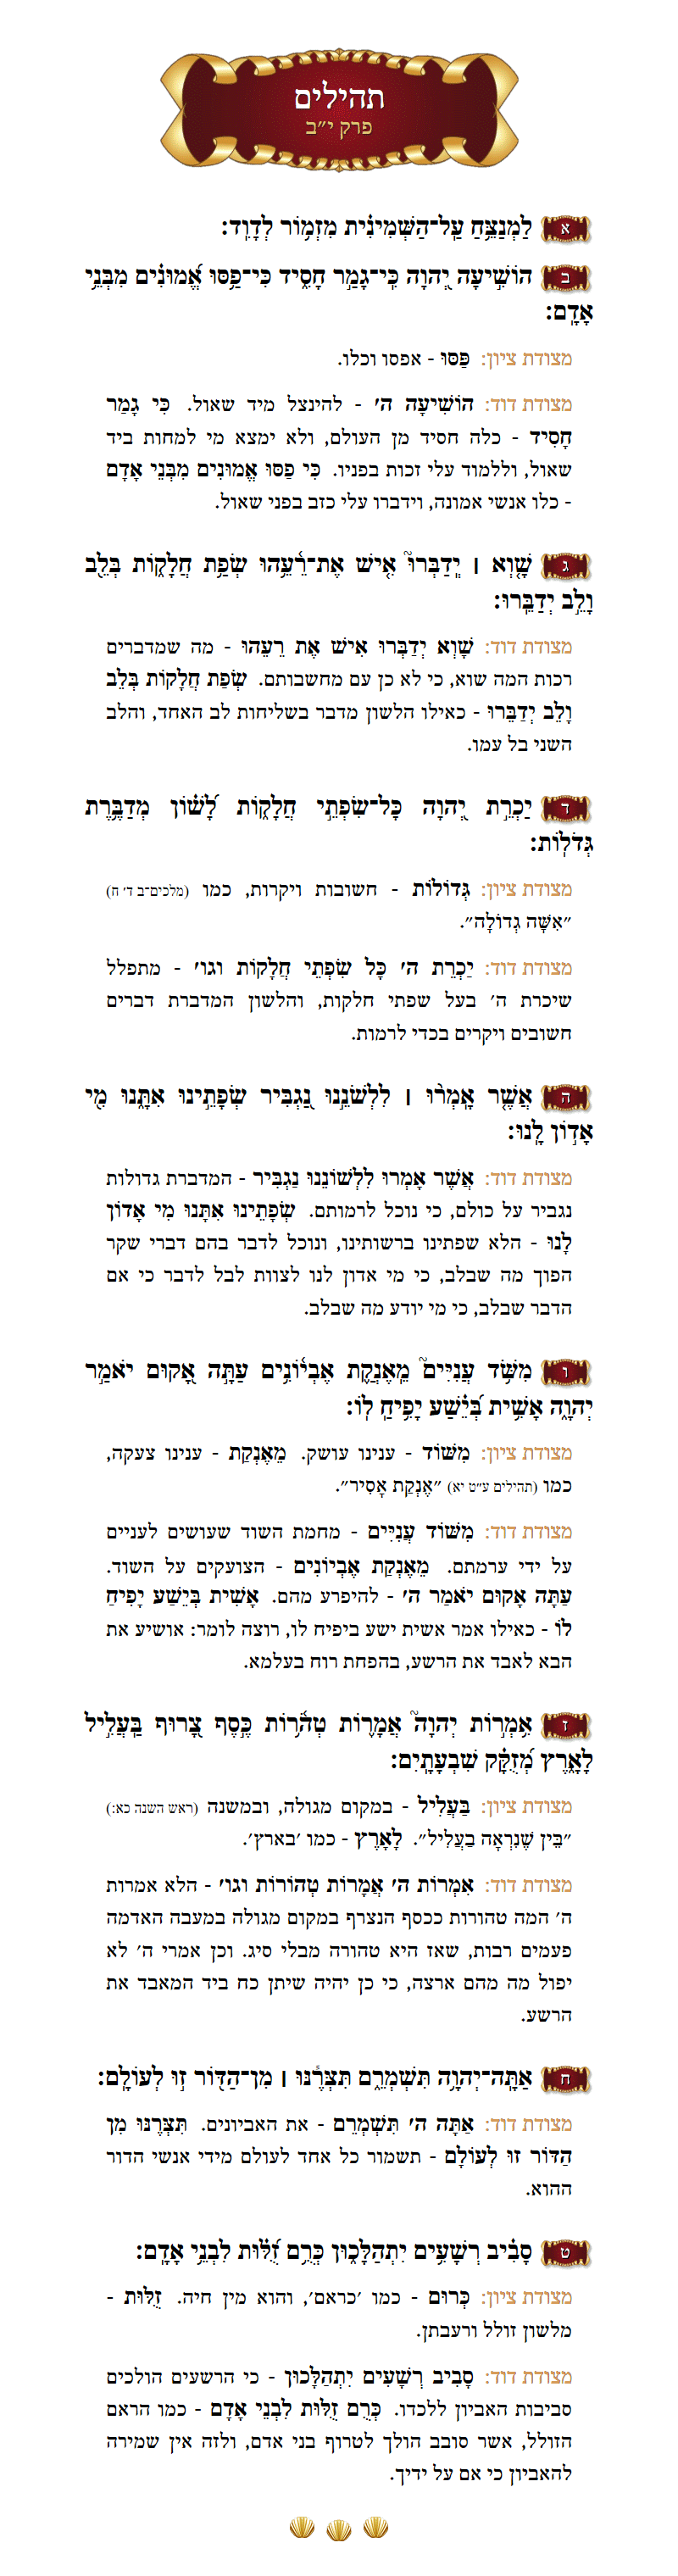 Sefer Tehillim Chapter 12 with commentary